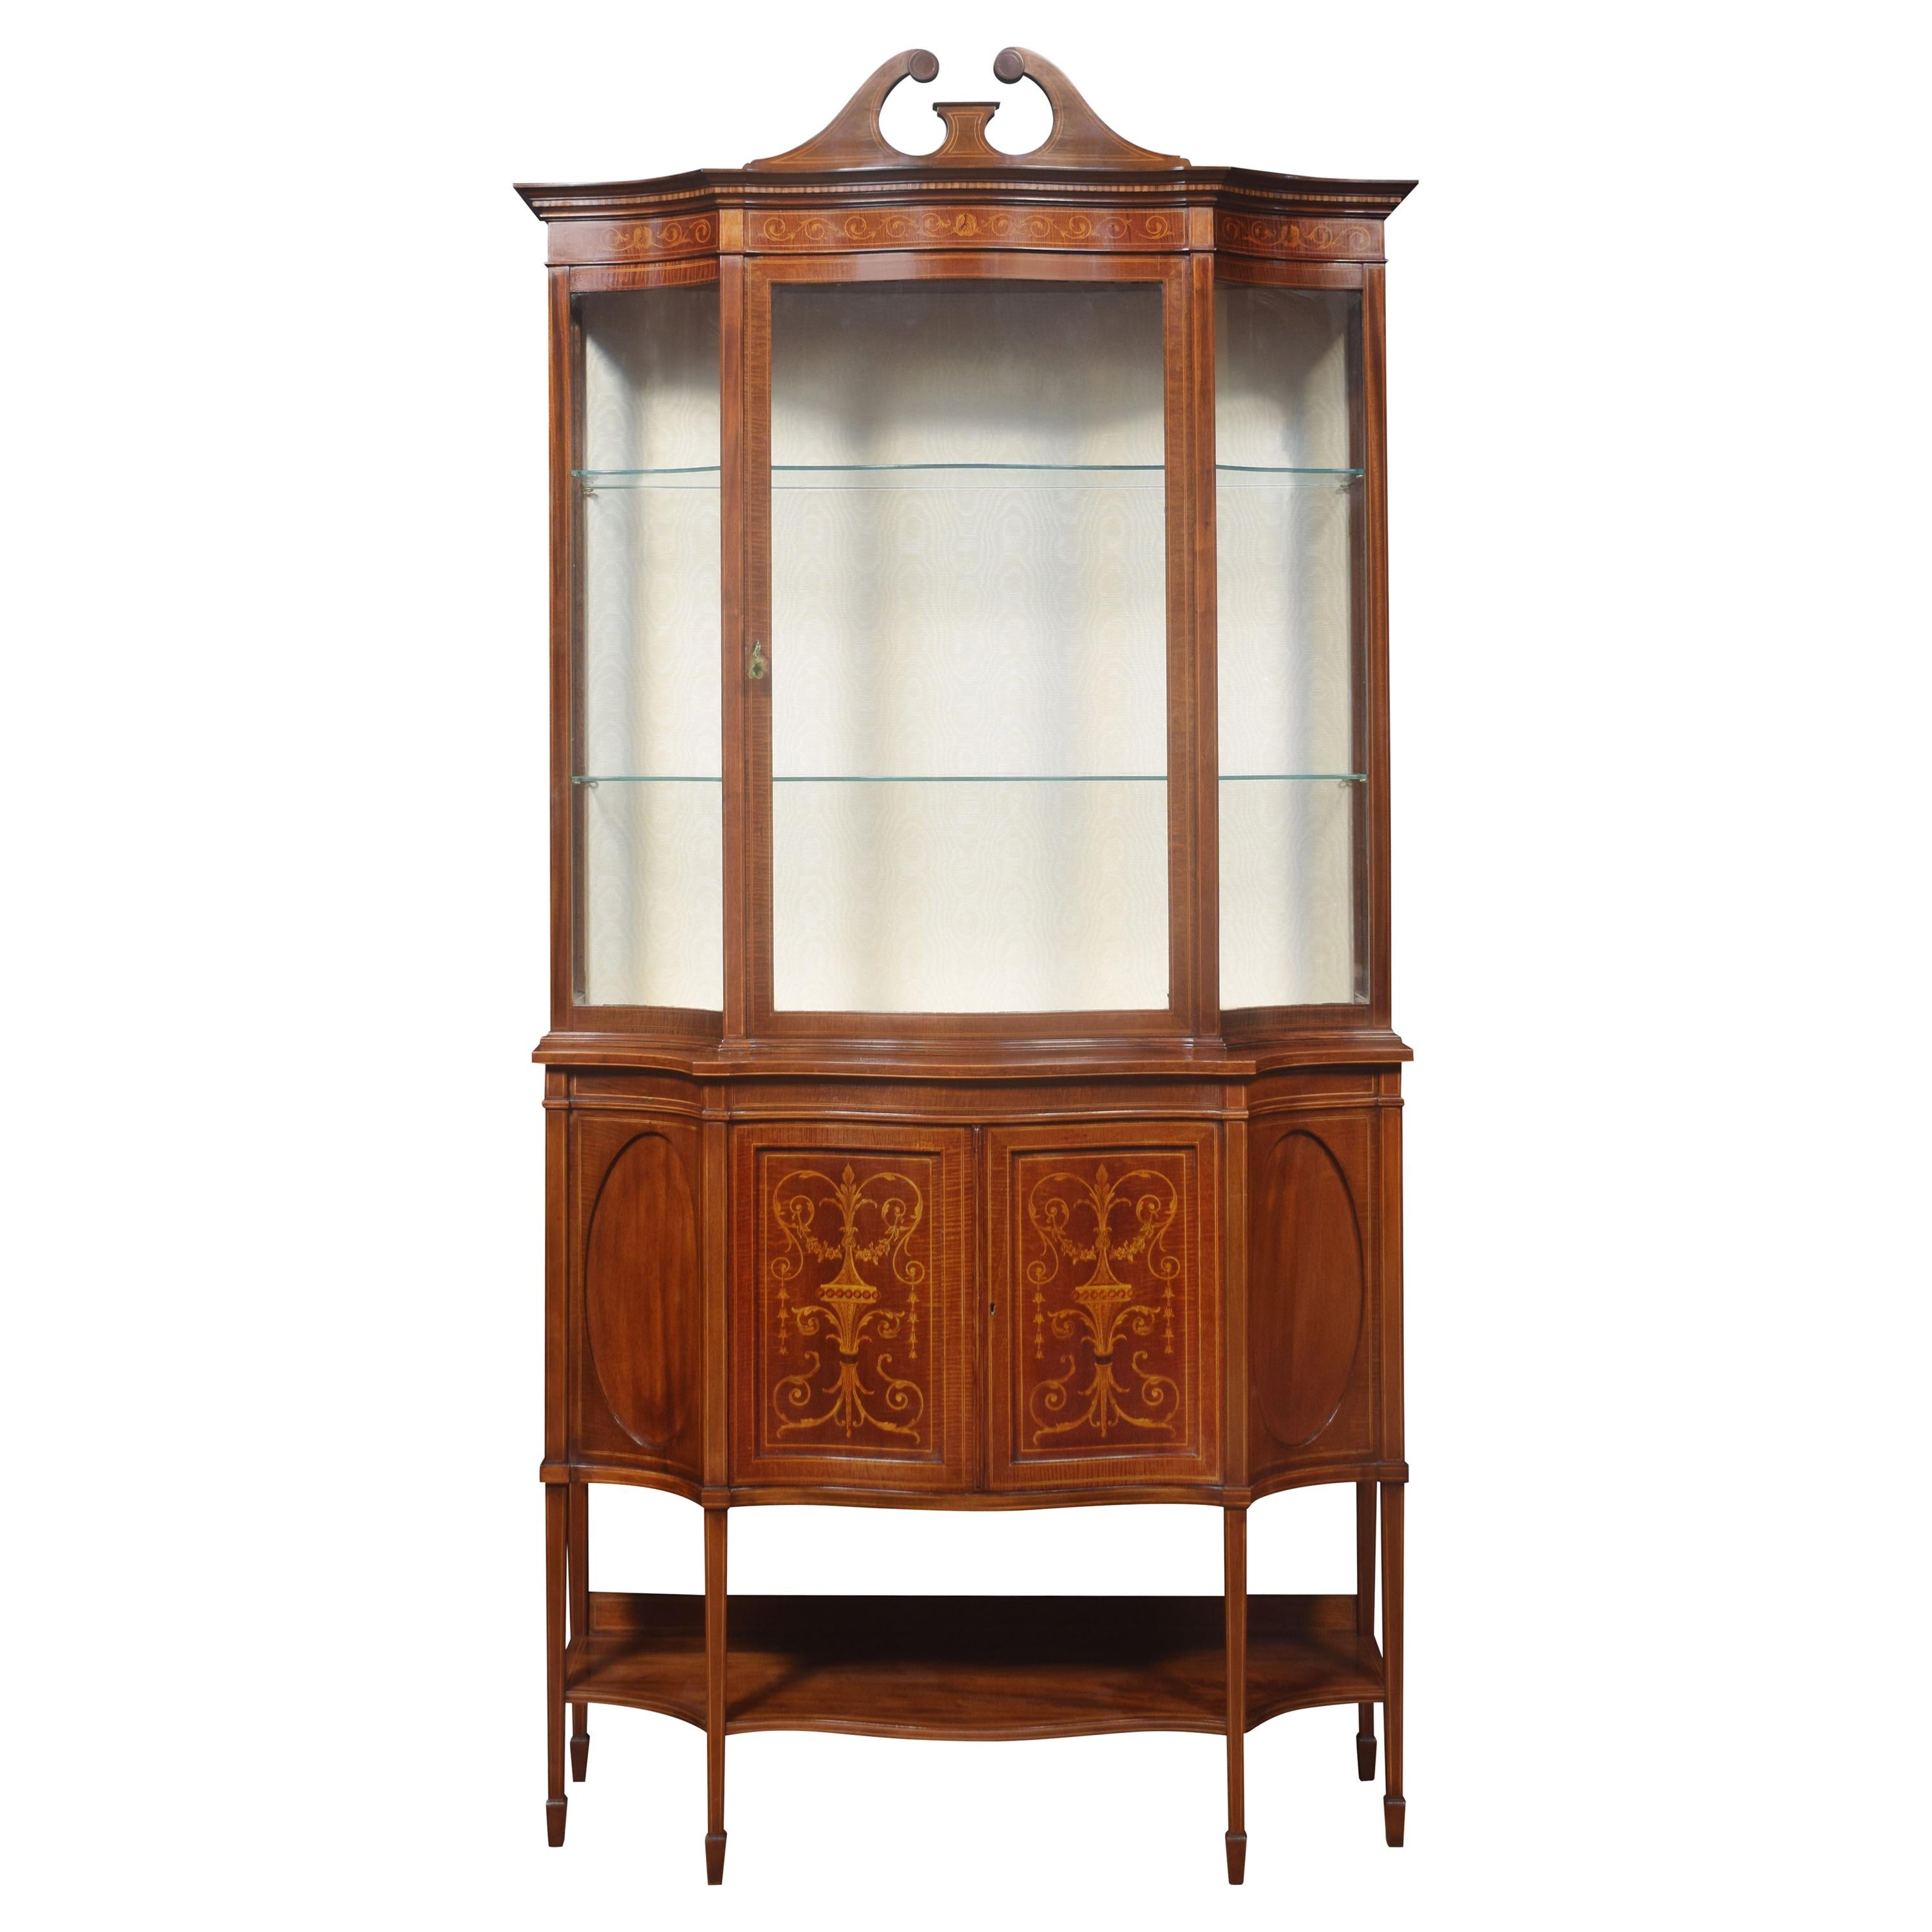  Mahogany Inlaid Serpentine Fronted Display Cabinet For Sale